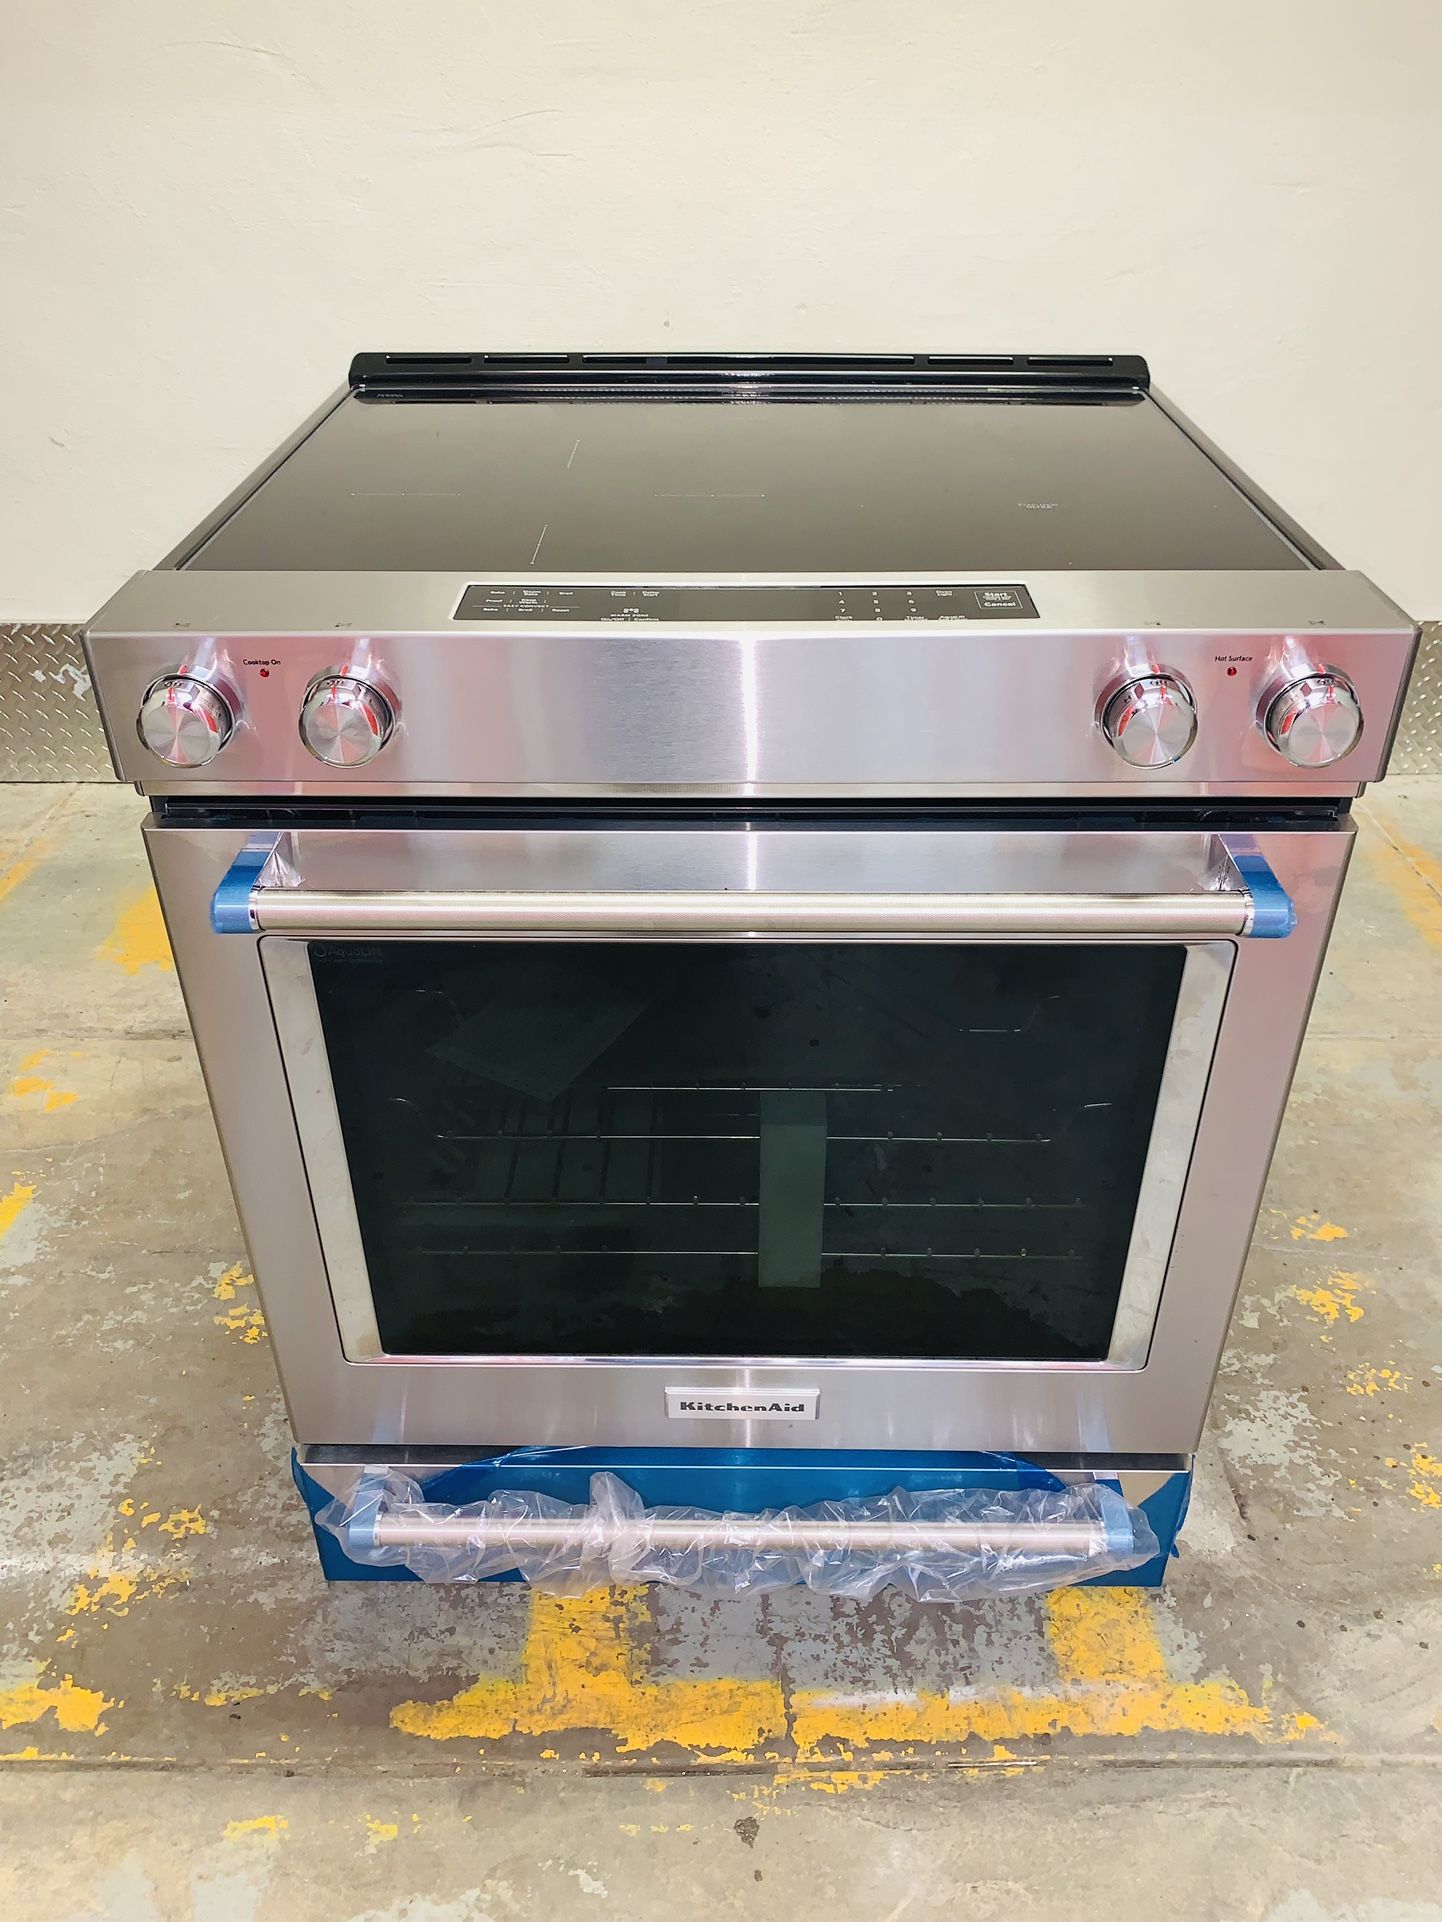 New KitchenAid stainless steel electric stove